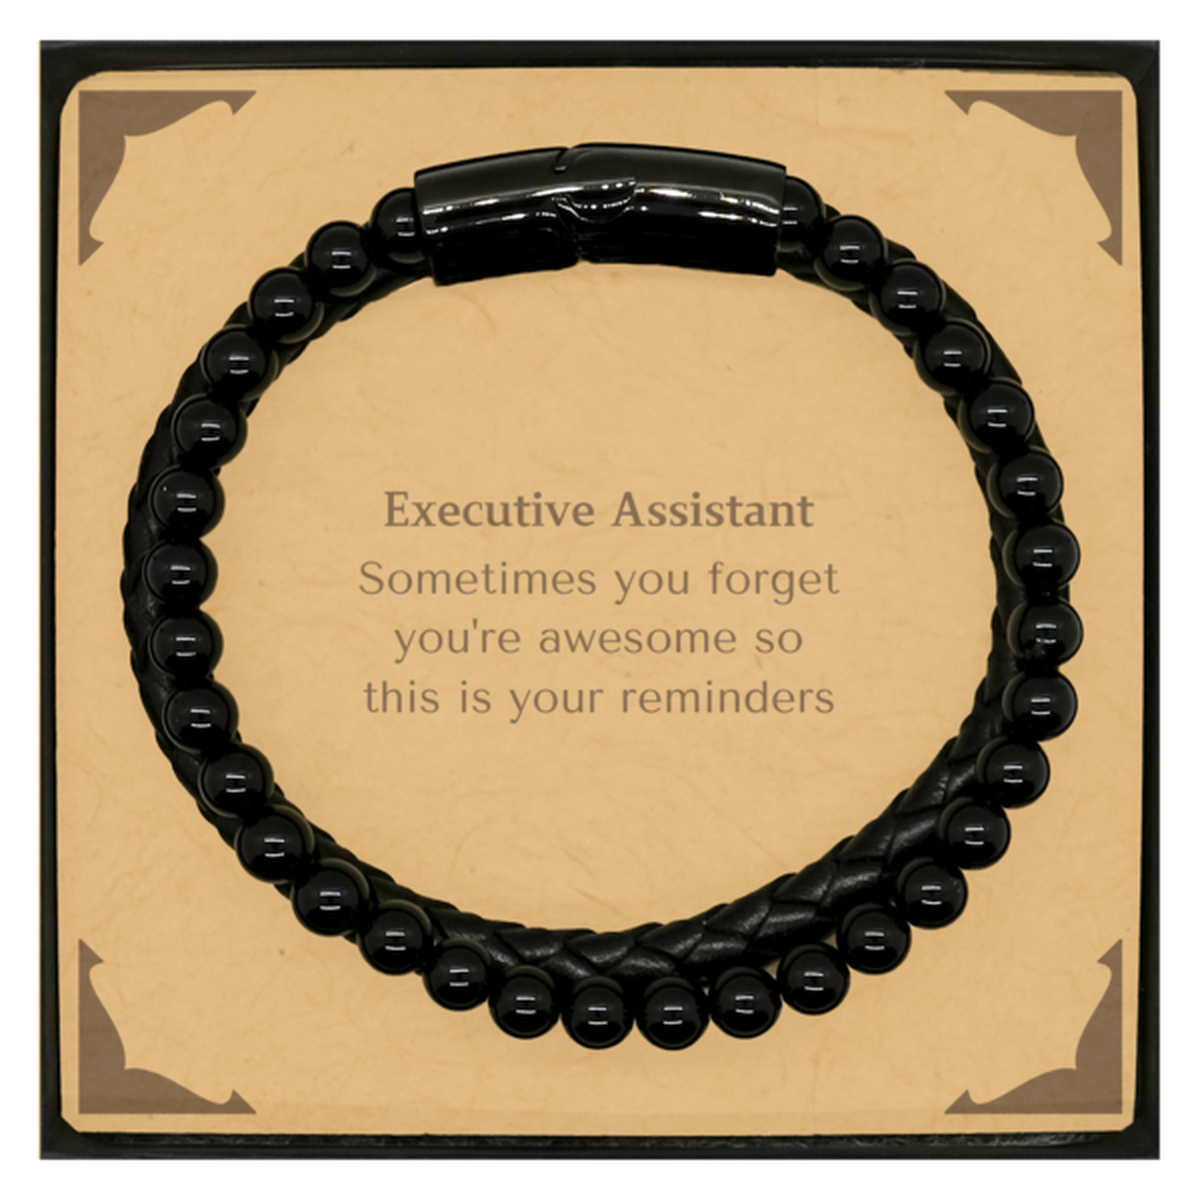 Sentimental Executive Assistant Stone Leather Bracelets, Executive Assistant Sometimes you forget you're awesome so this is your reminders, Graduation Christmas Birthday Gifts for Executive Assistant, Men, Women, Coworkers